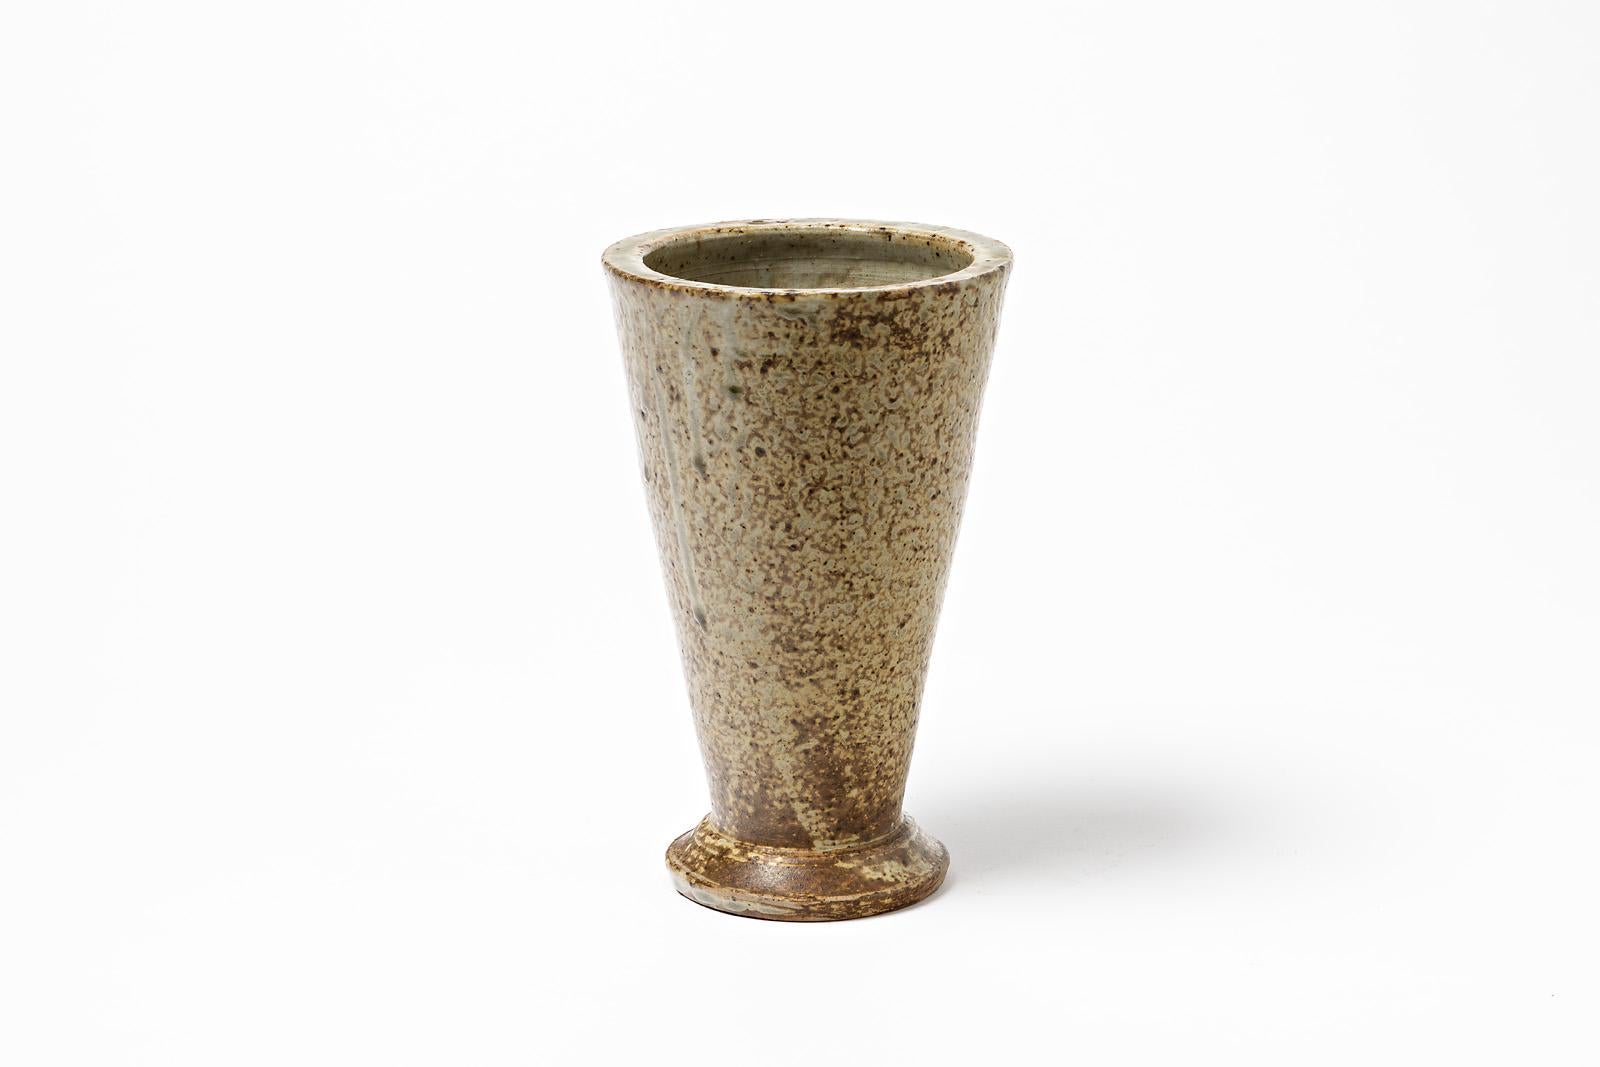 Marius Bernon

French brown ceramic stoneware vase by French artist, circa 1950.

Conical elegant form and stoneware ceramic glaze color.

Signed under the base

Dimensions: 22 x 14 x 14cm.